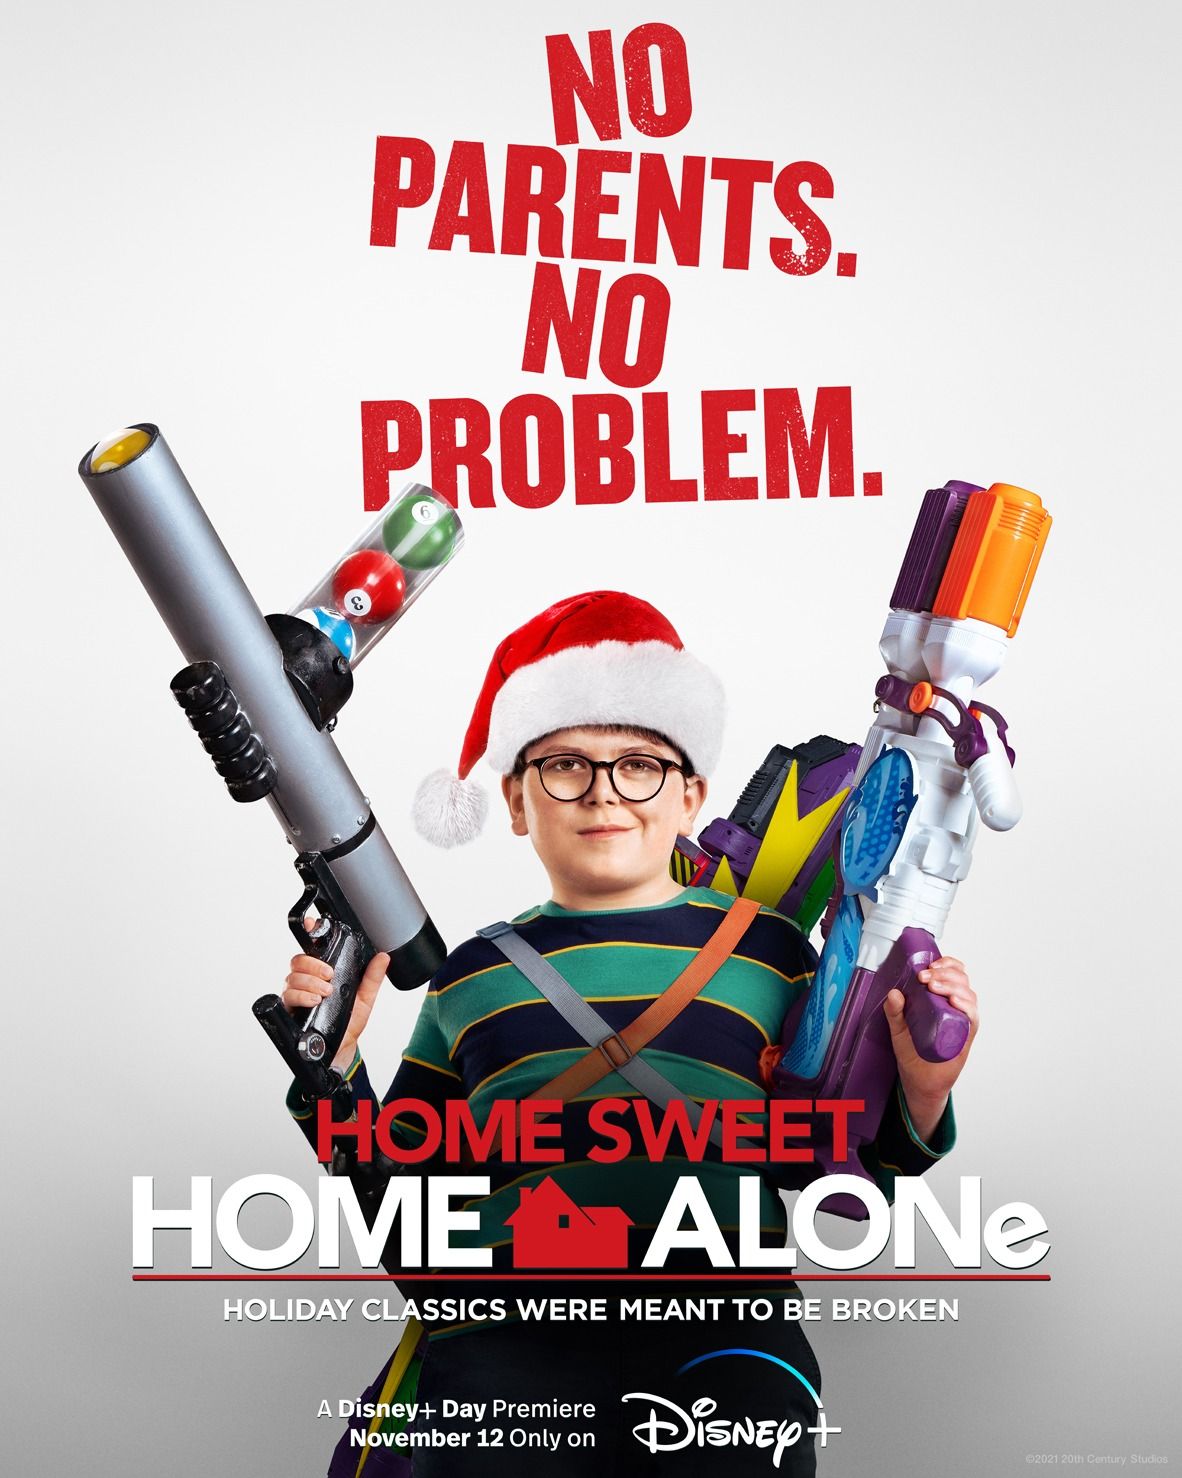 Home Sweet Home Alone (2021) Hindi Dubbed Full Movie